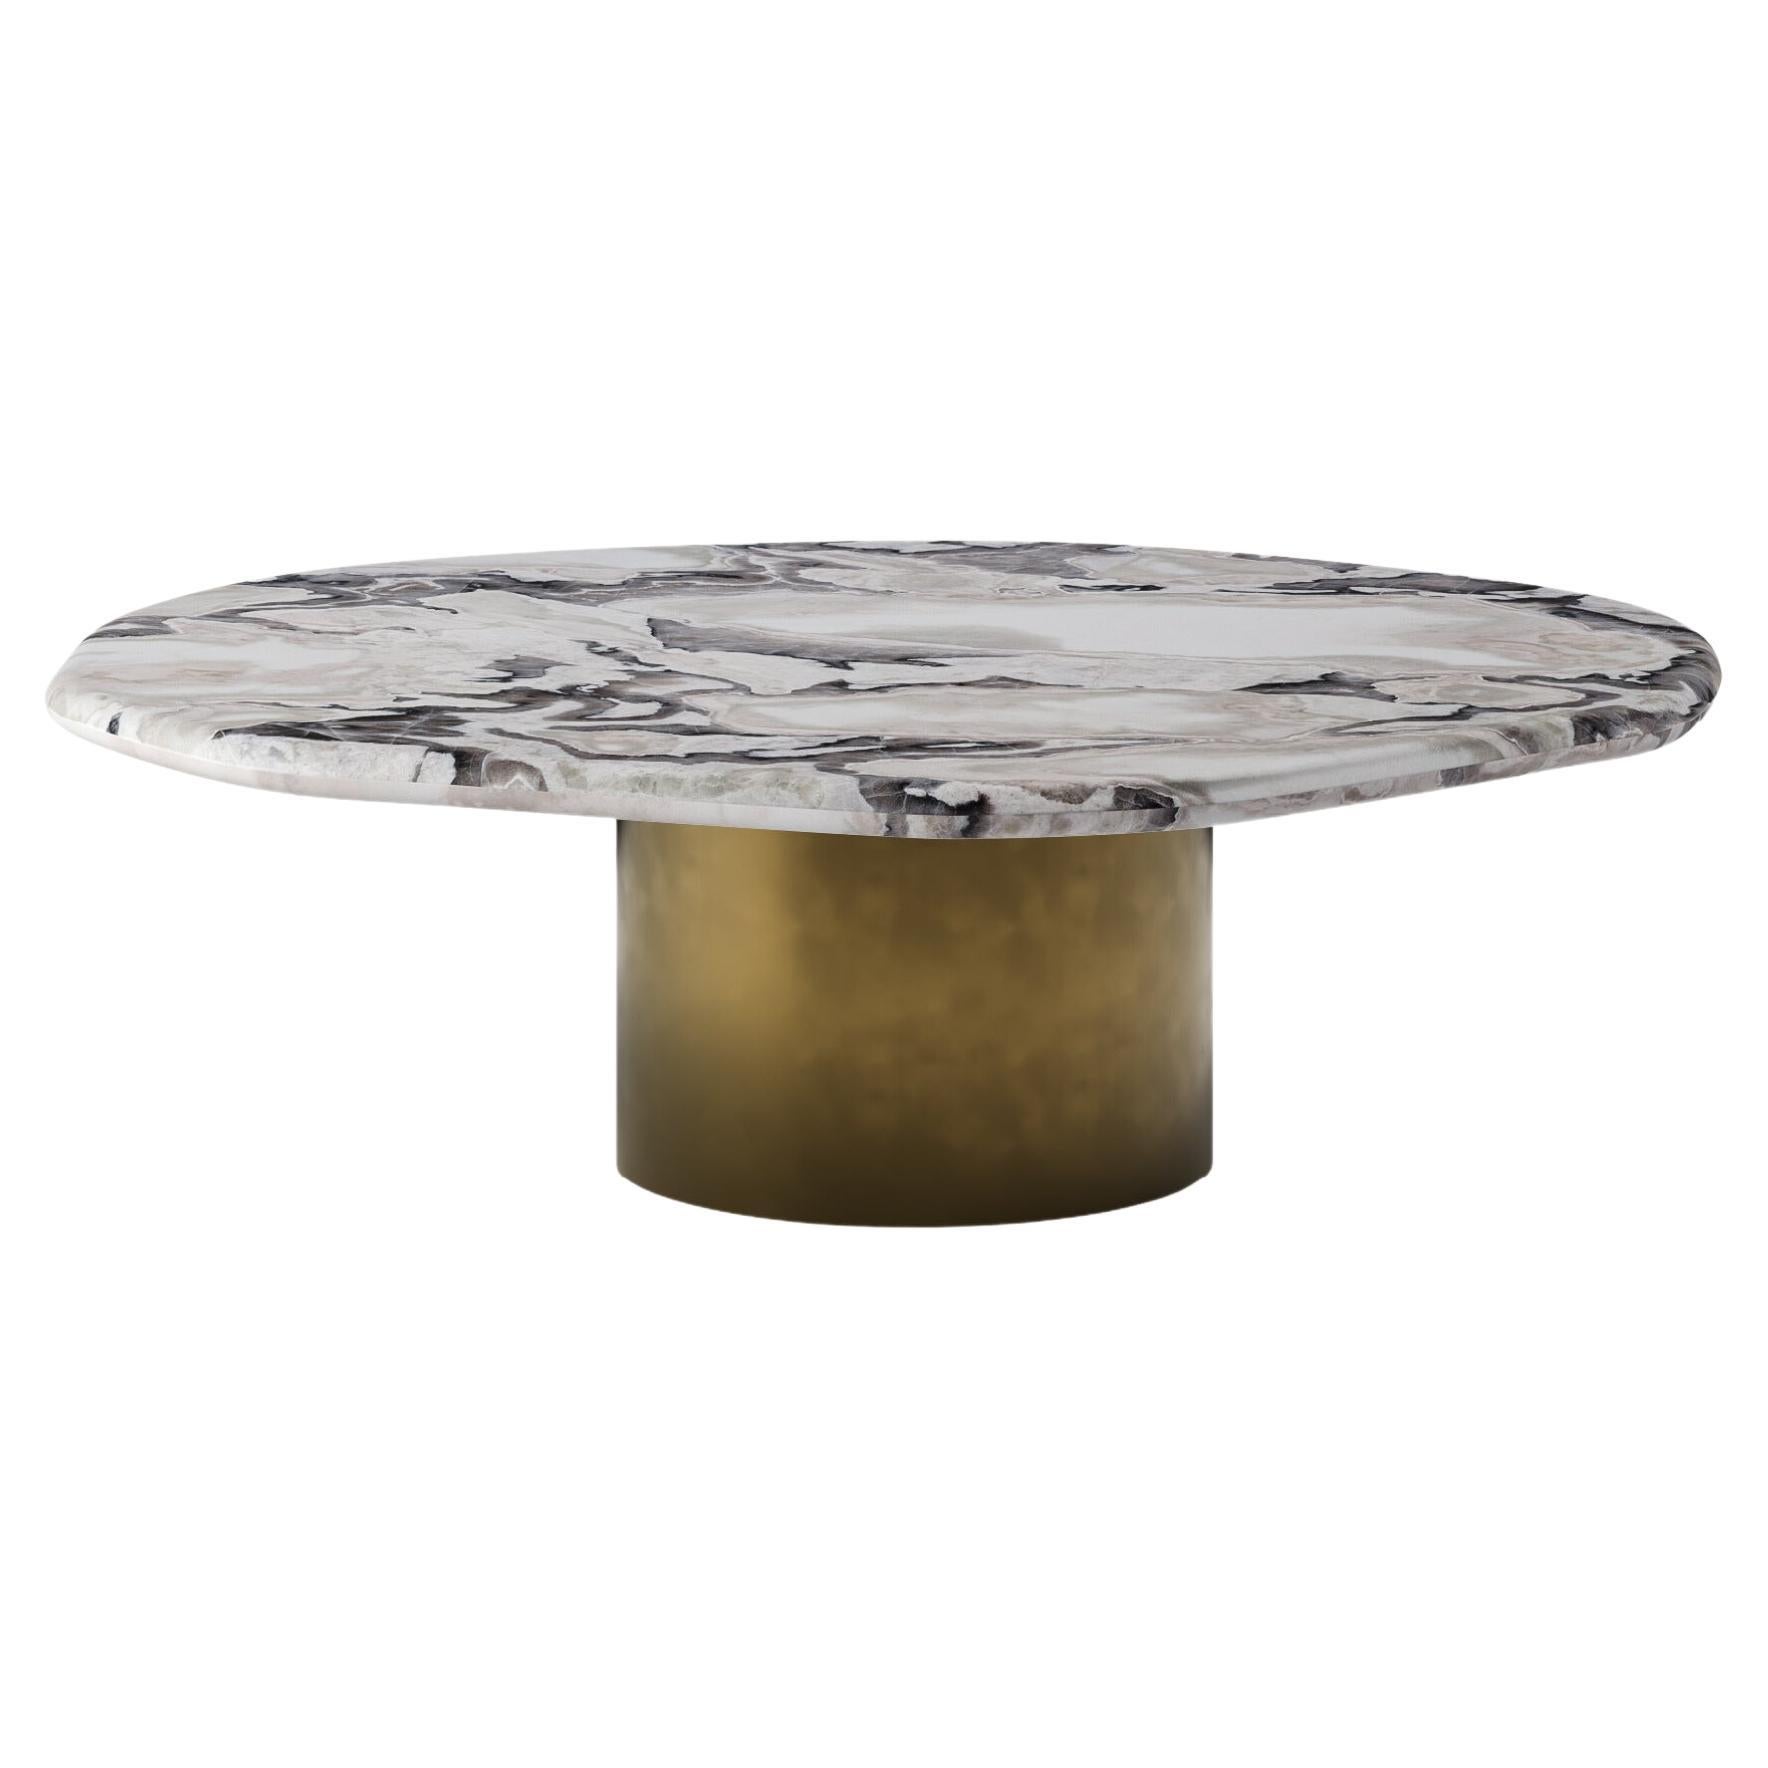 FORM(LA) Lago Round Coffee Table 60”L x 60”W x 14”H Oyster Marble & Bronze For Sale